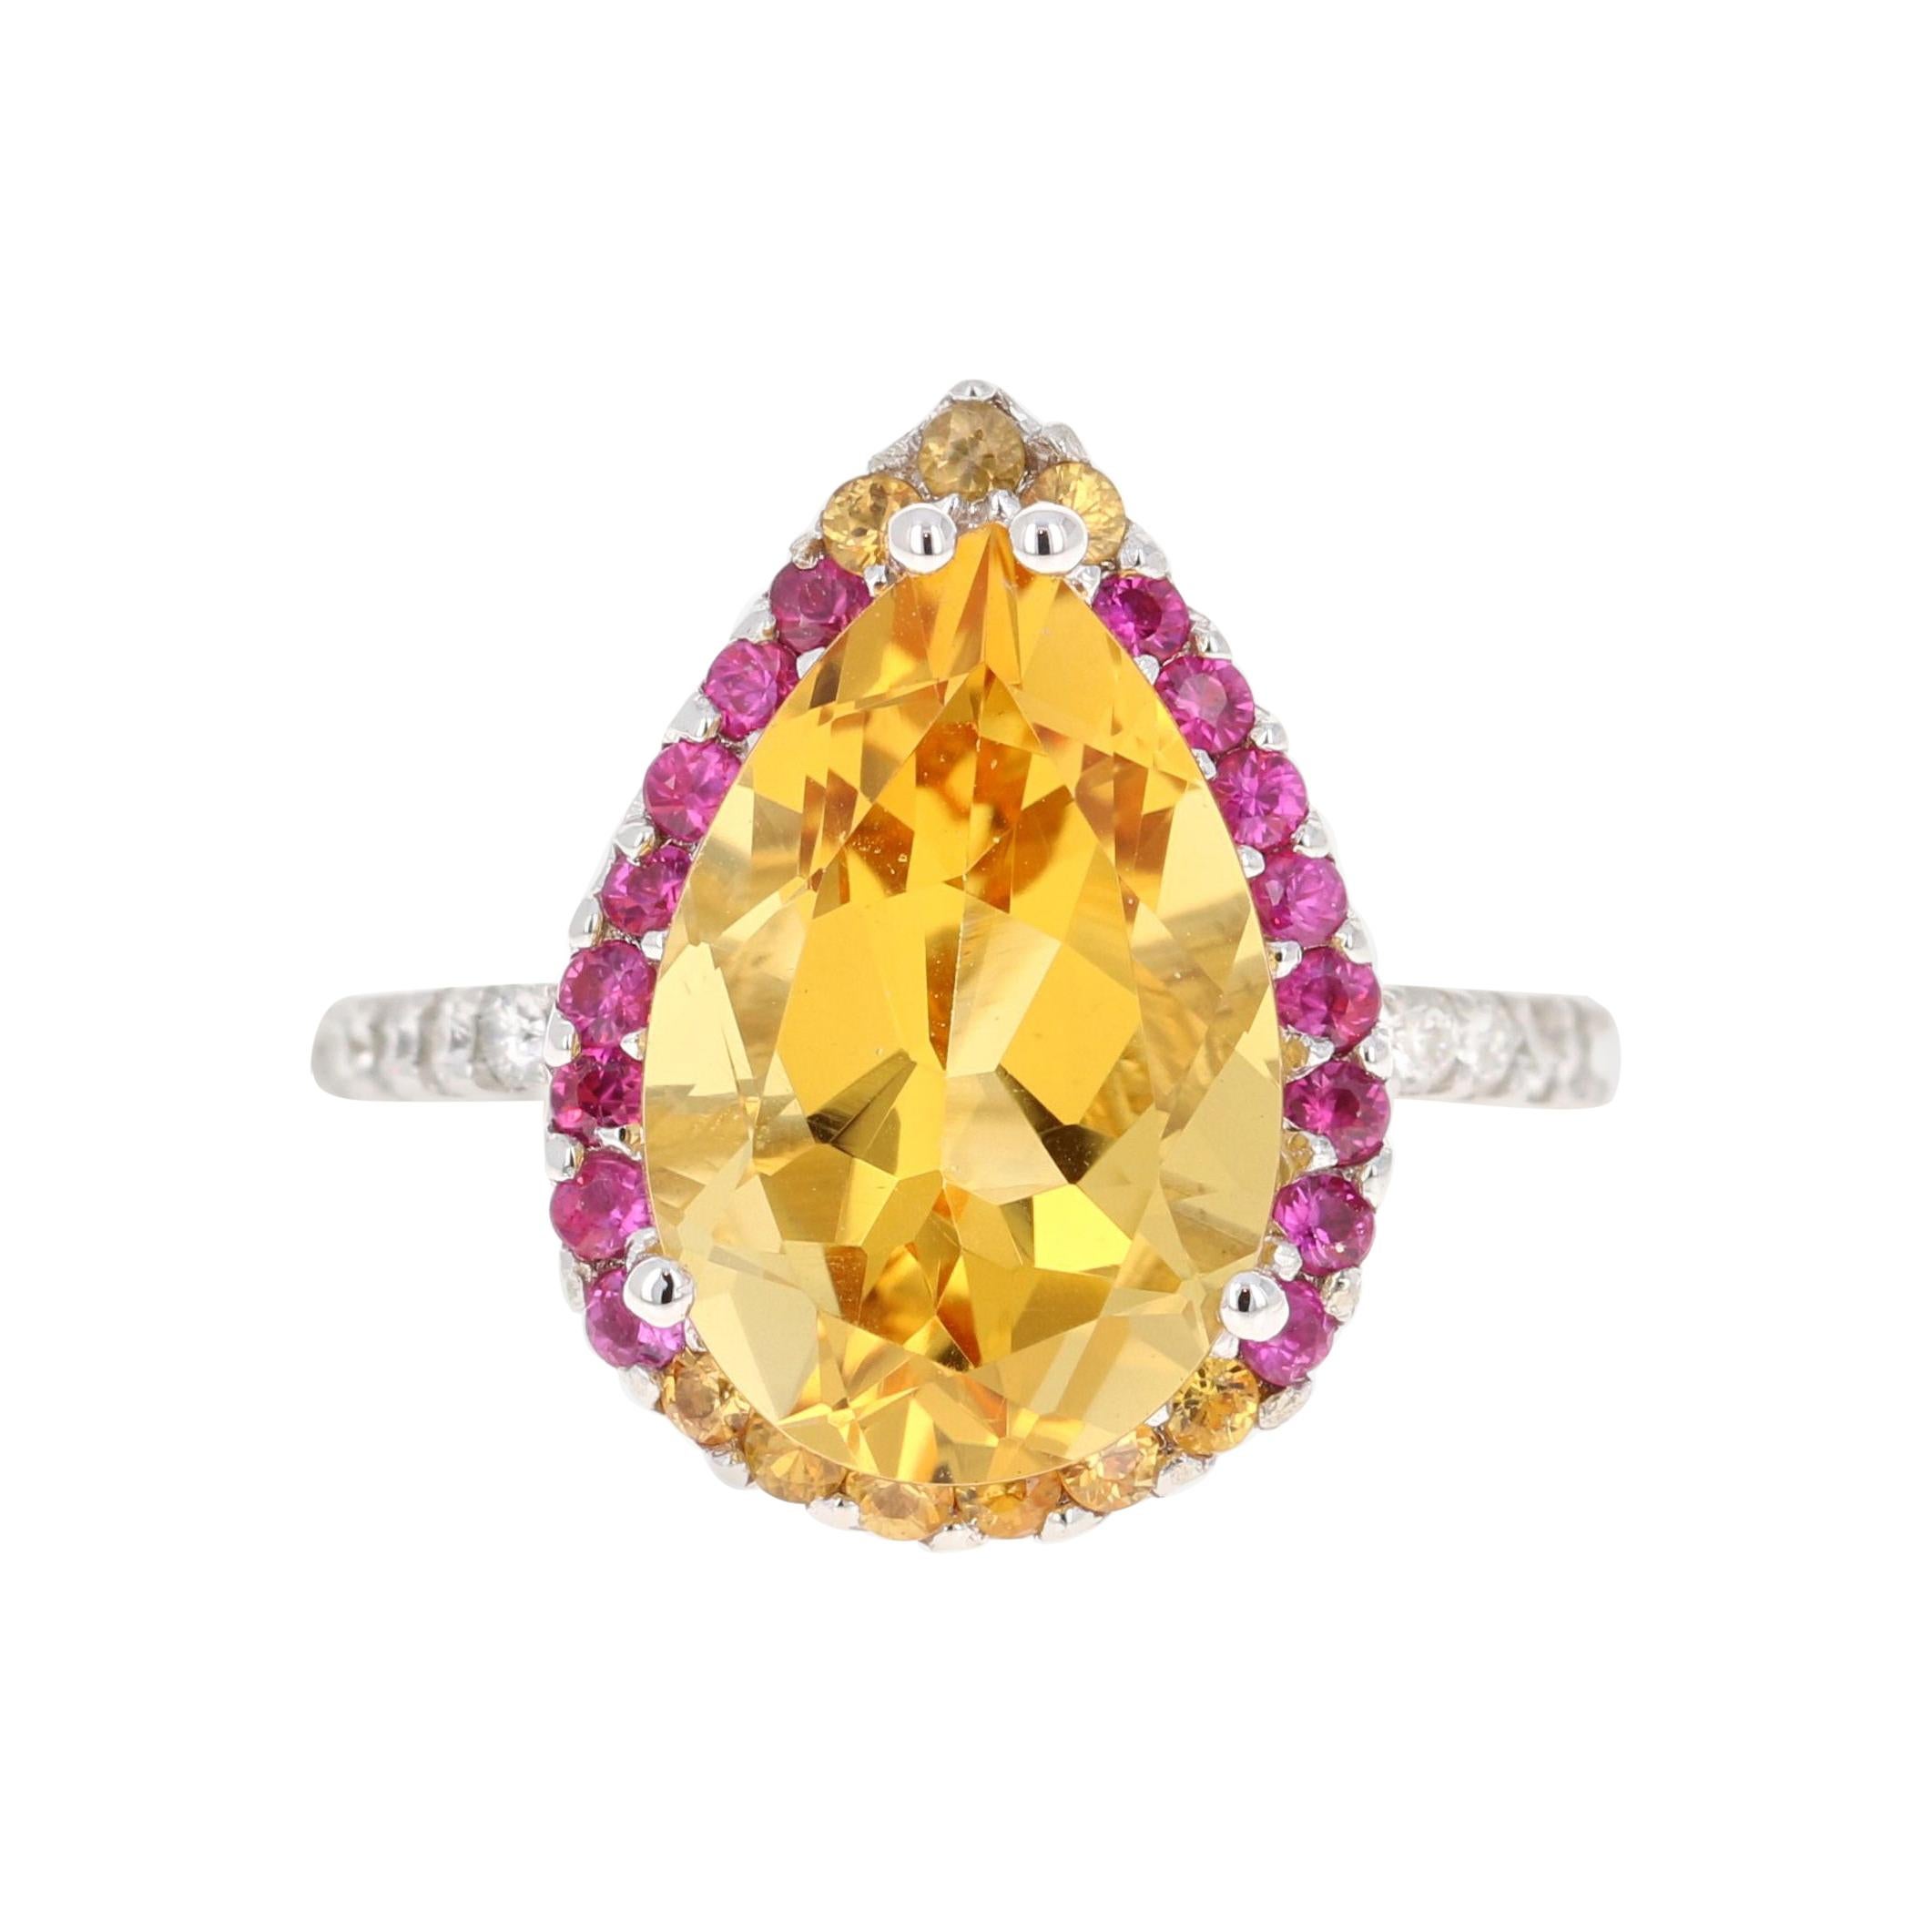 This gorgeous ring has a magnificent Pear Cut Citrine Quartz weighing 5.28 Carats and is surrounded by 25 Pink and Yellow Sapphires that weigh 0.60 carats and 20 Round Cut Diamonds that weigh 0.37 carats. (Clarity: SI, Color: F) The total carat